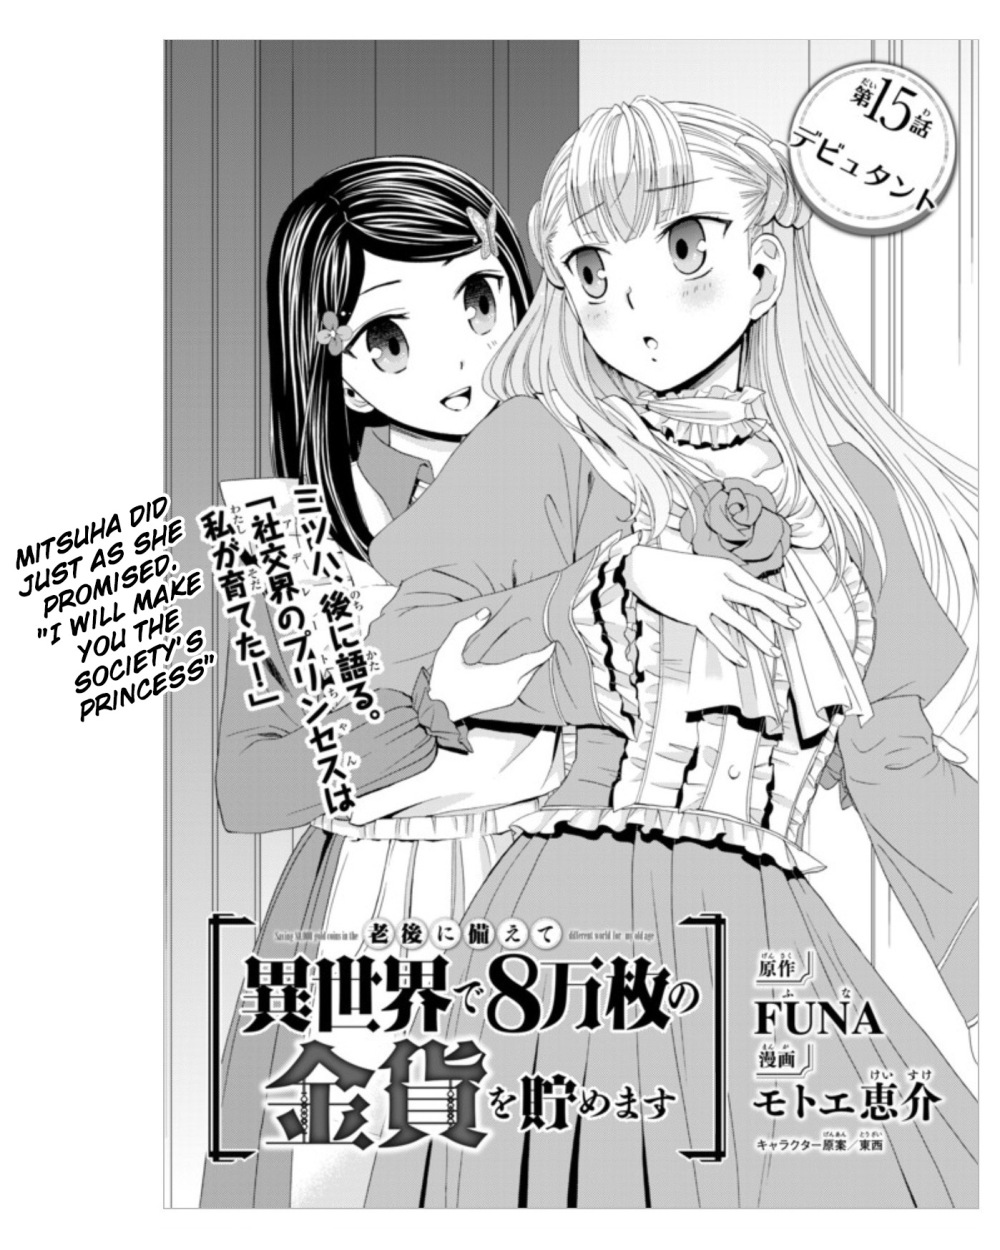 Saving 80,000 Gold Coins in the Different World for My Old Age Vol. 2 Ch. 15 Debutante